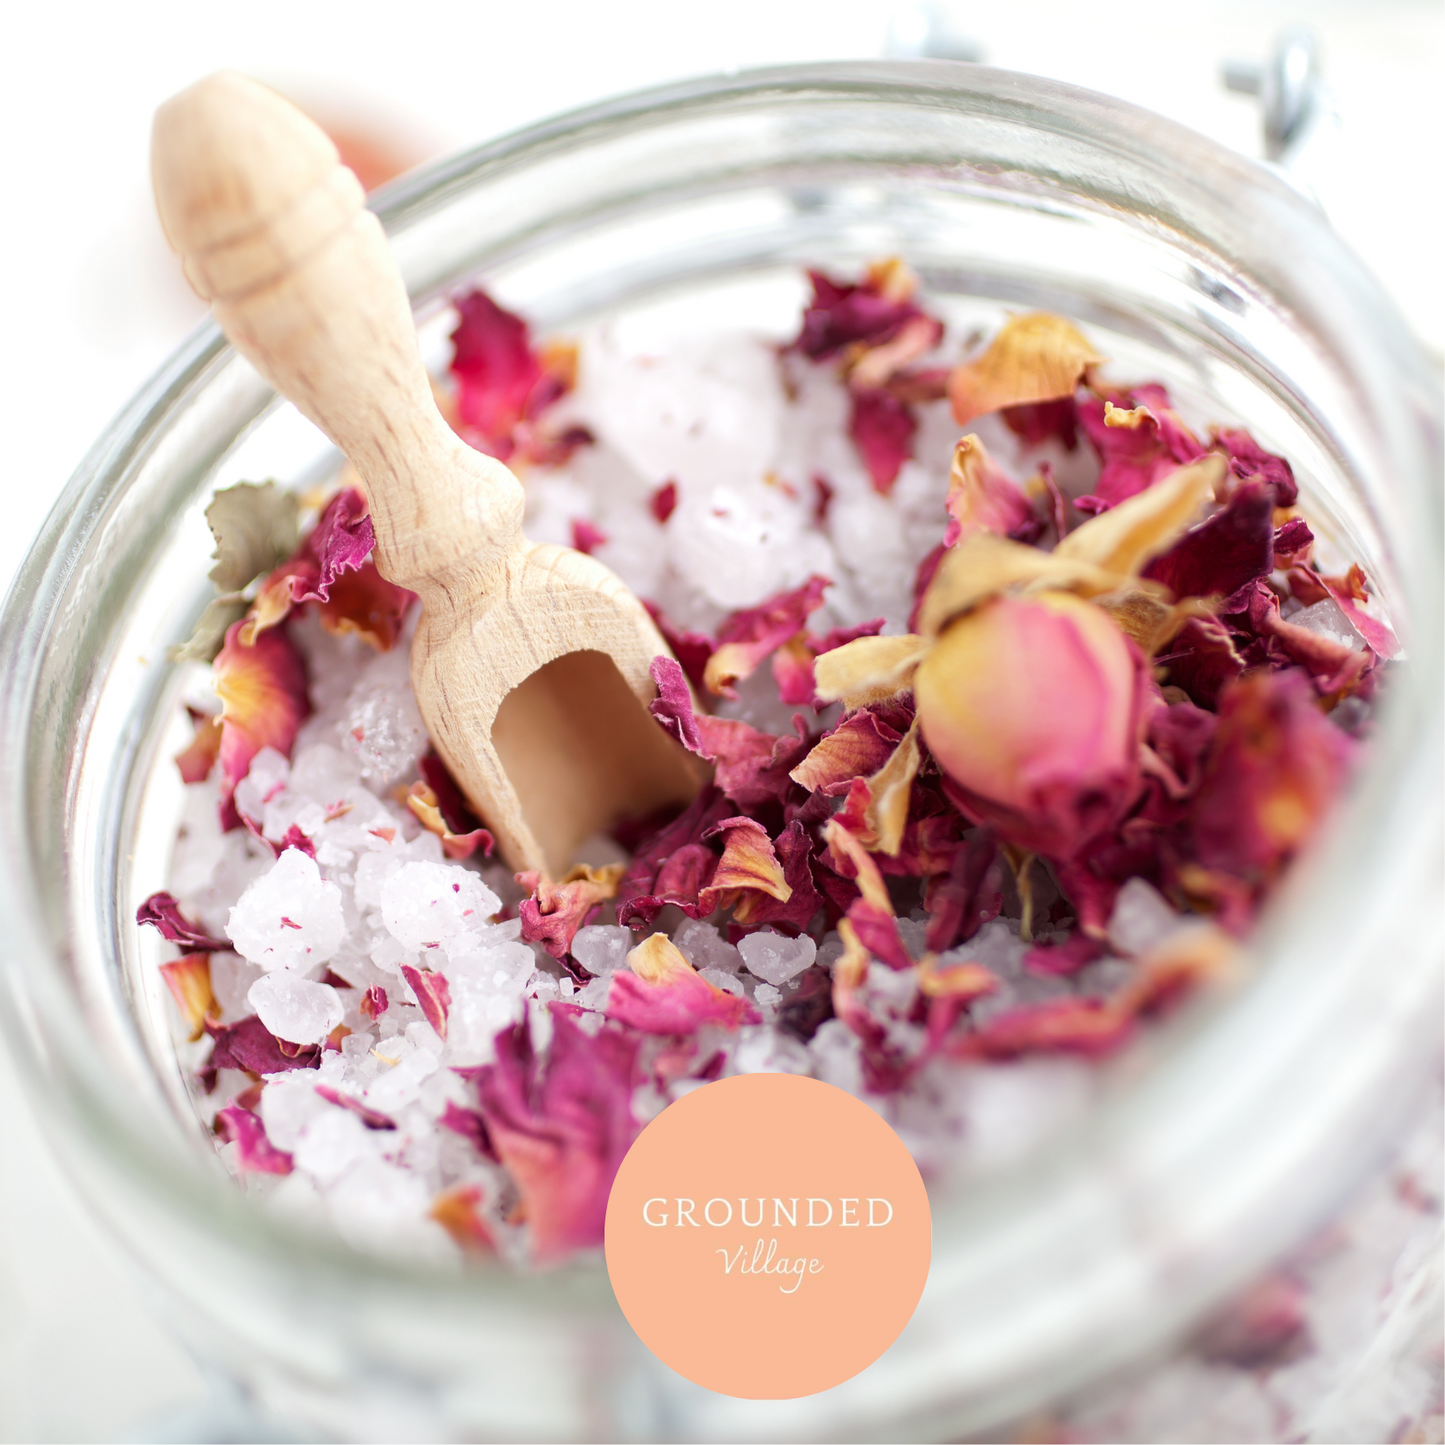 Body Bliss natural  body products workshop- Sunday 7th April